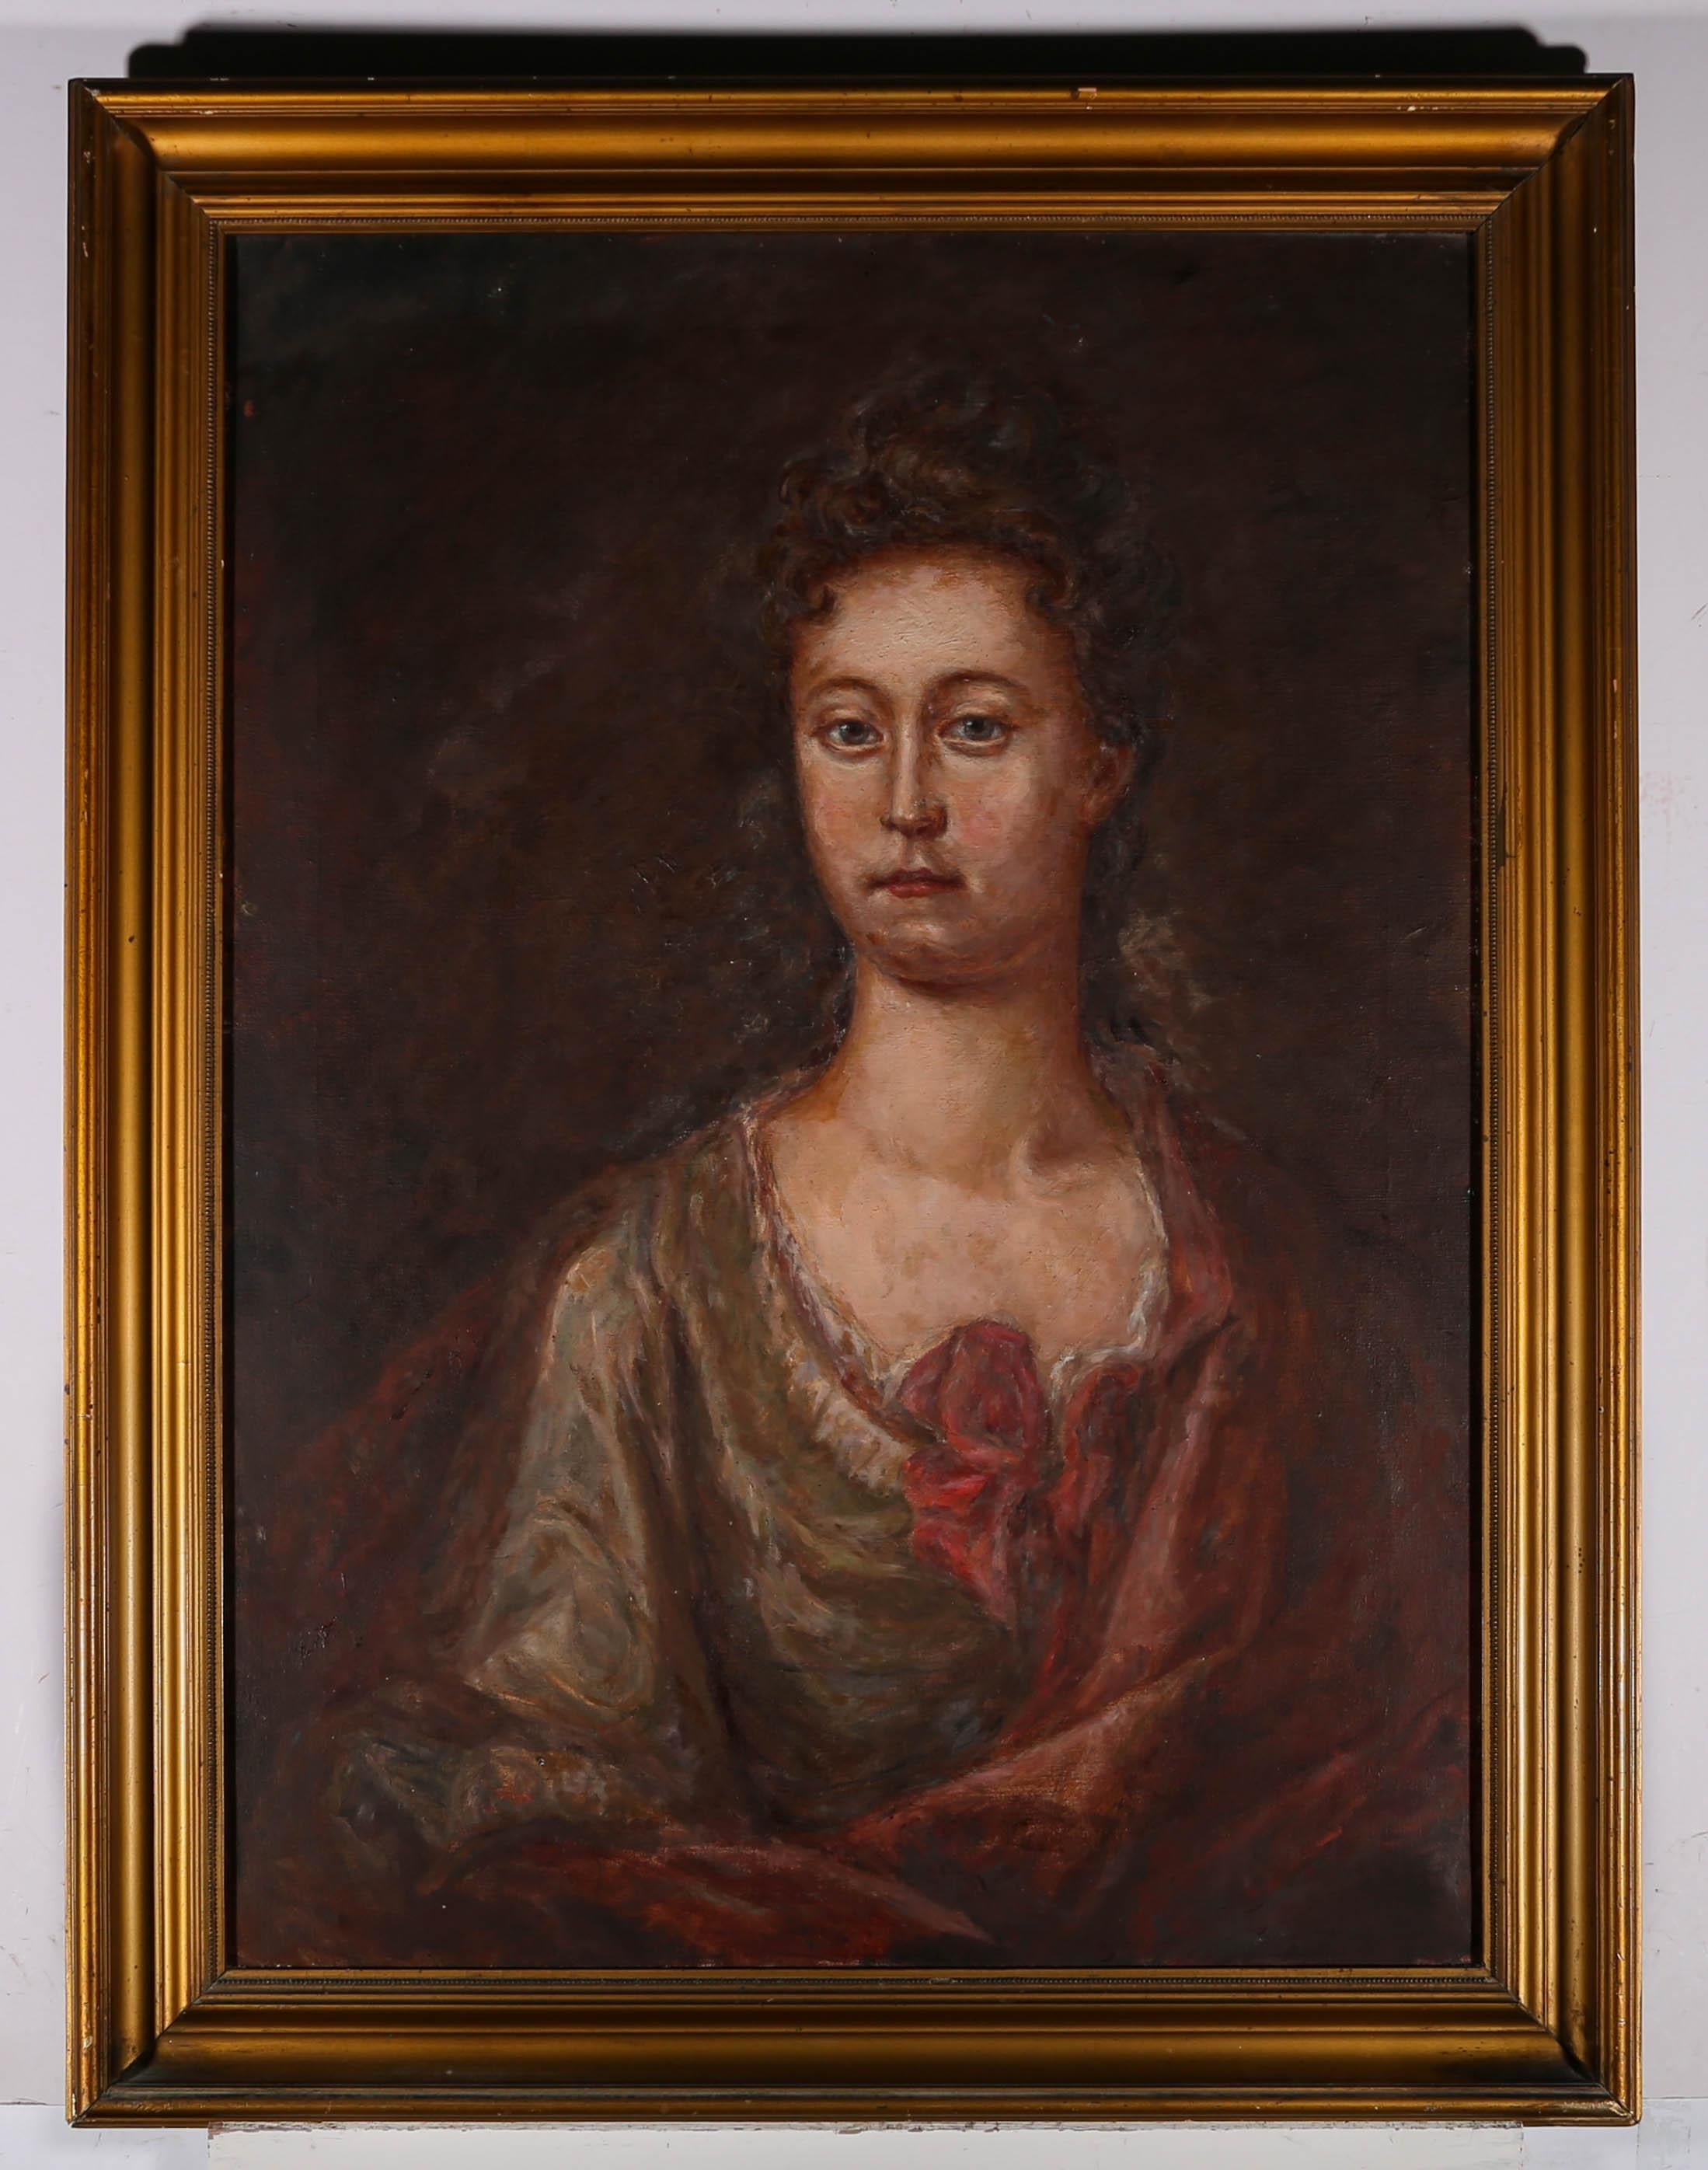 Unknown Portrait Painting - Early 20th Century Oil - Ann Heron